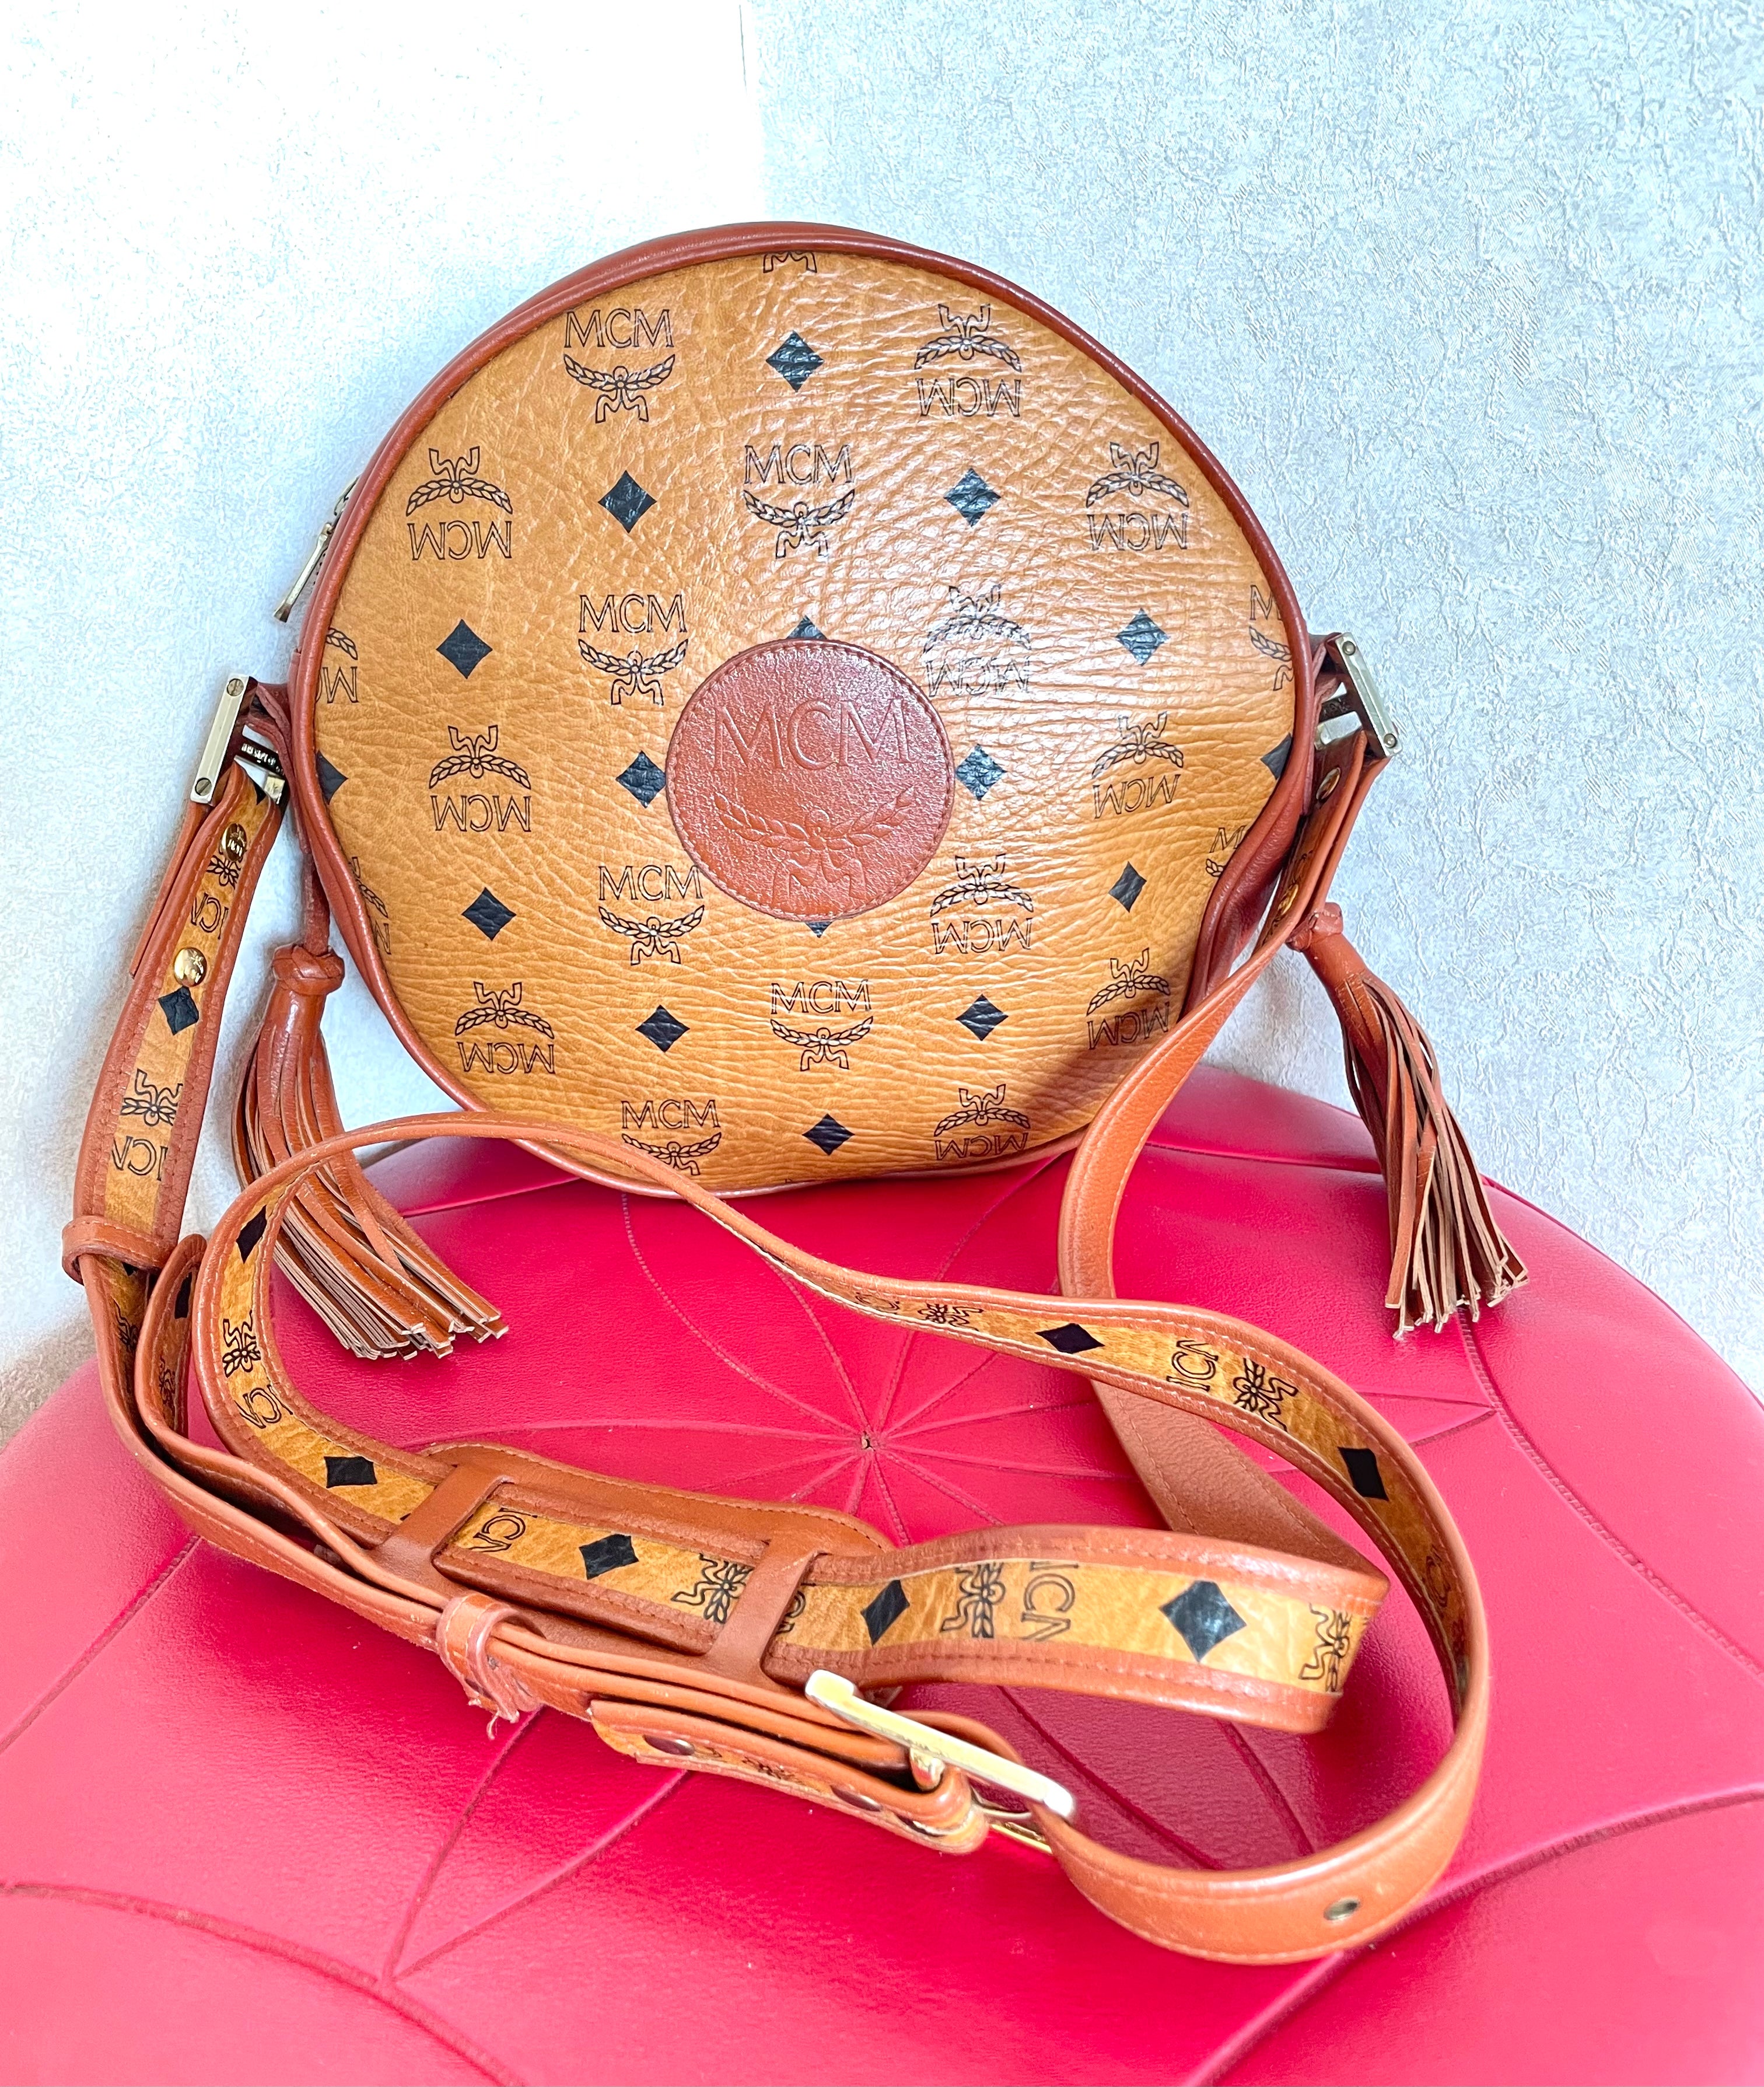 Rare Louis Vuitton golf bag, 1970s - THE HOUSE OF WAUW